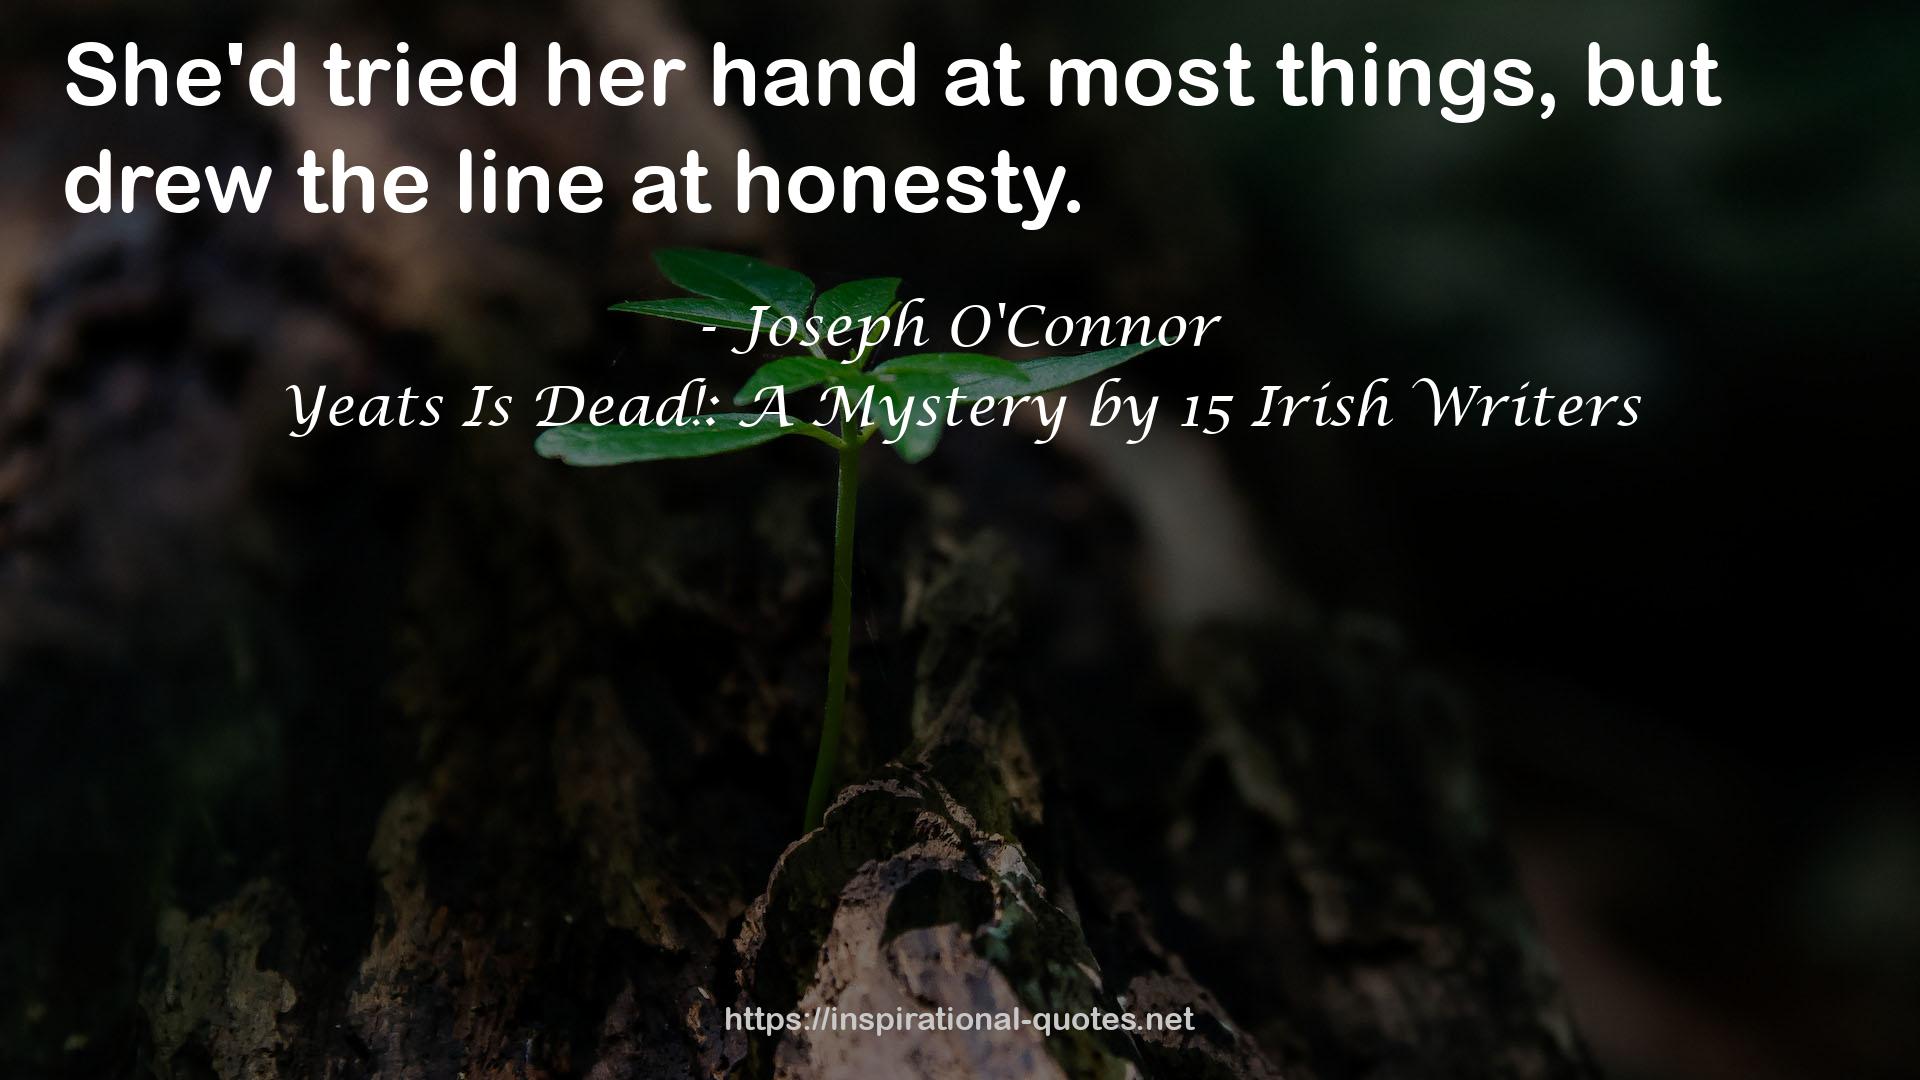 Yeats Is Dead!: A Mystery by 15 Irish Writers QUOTES